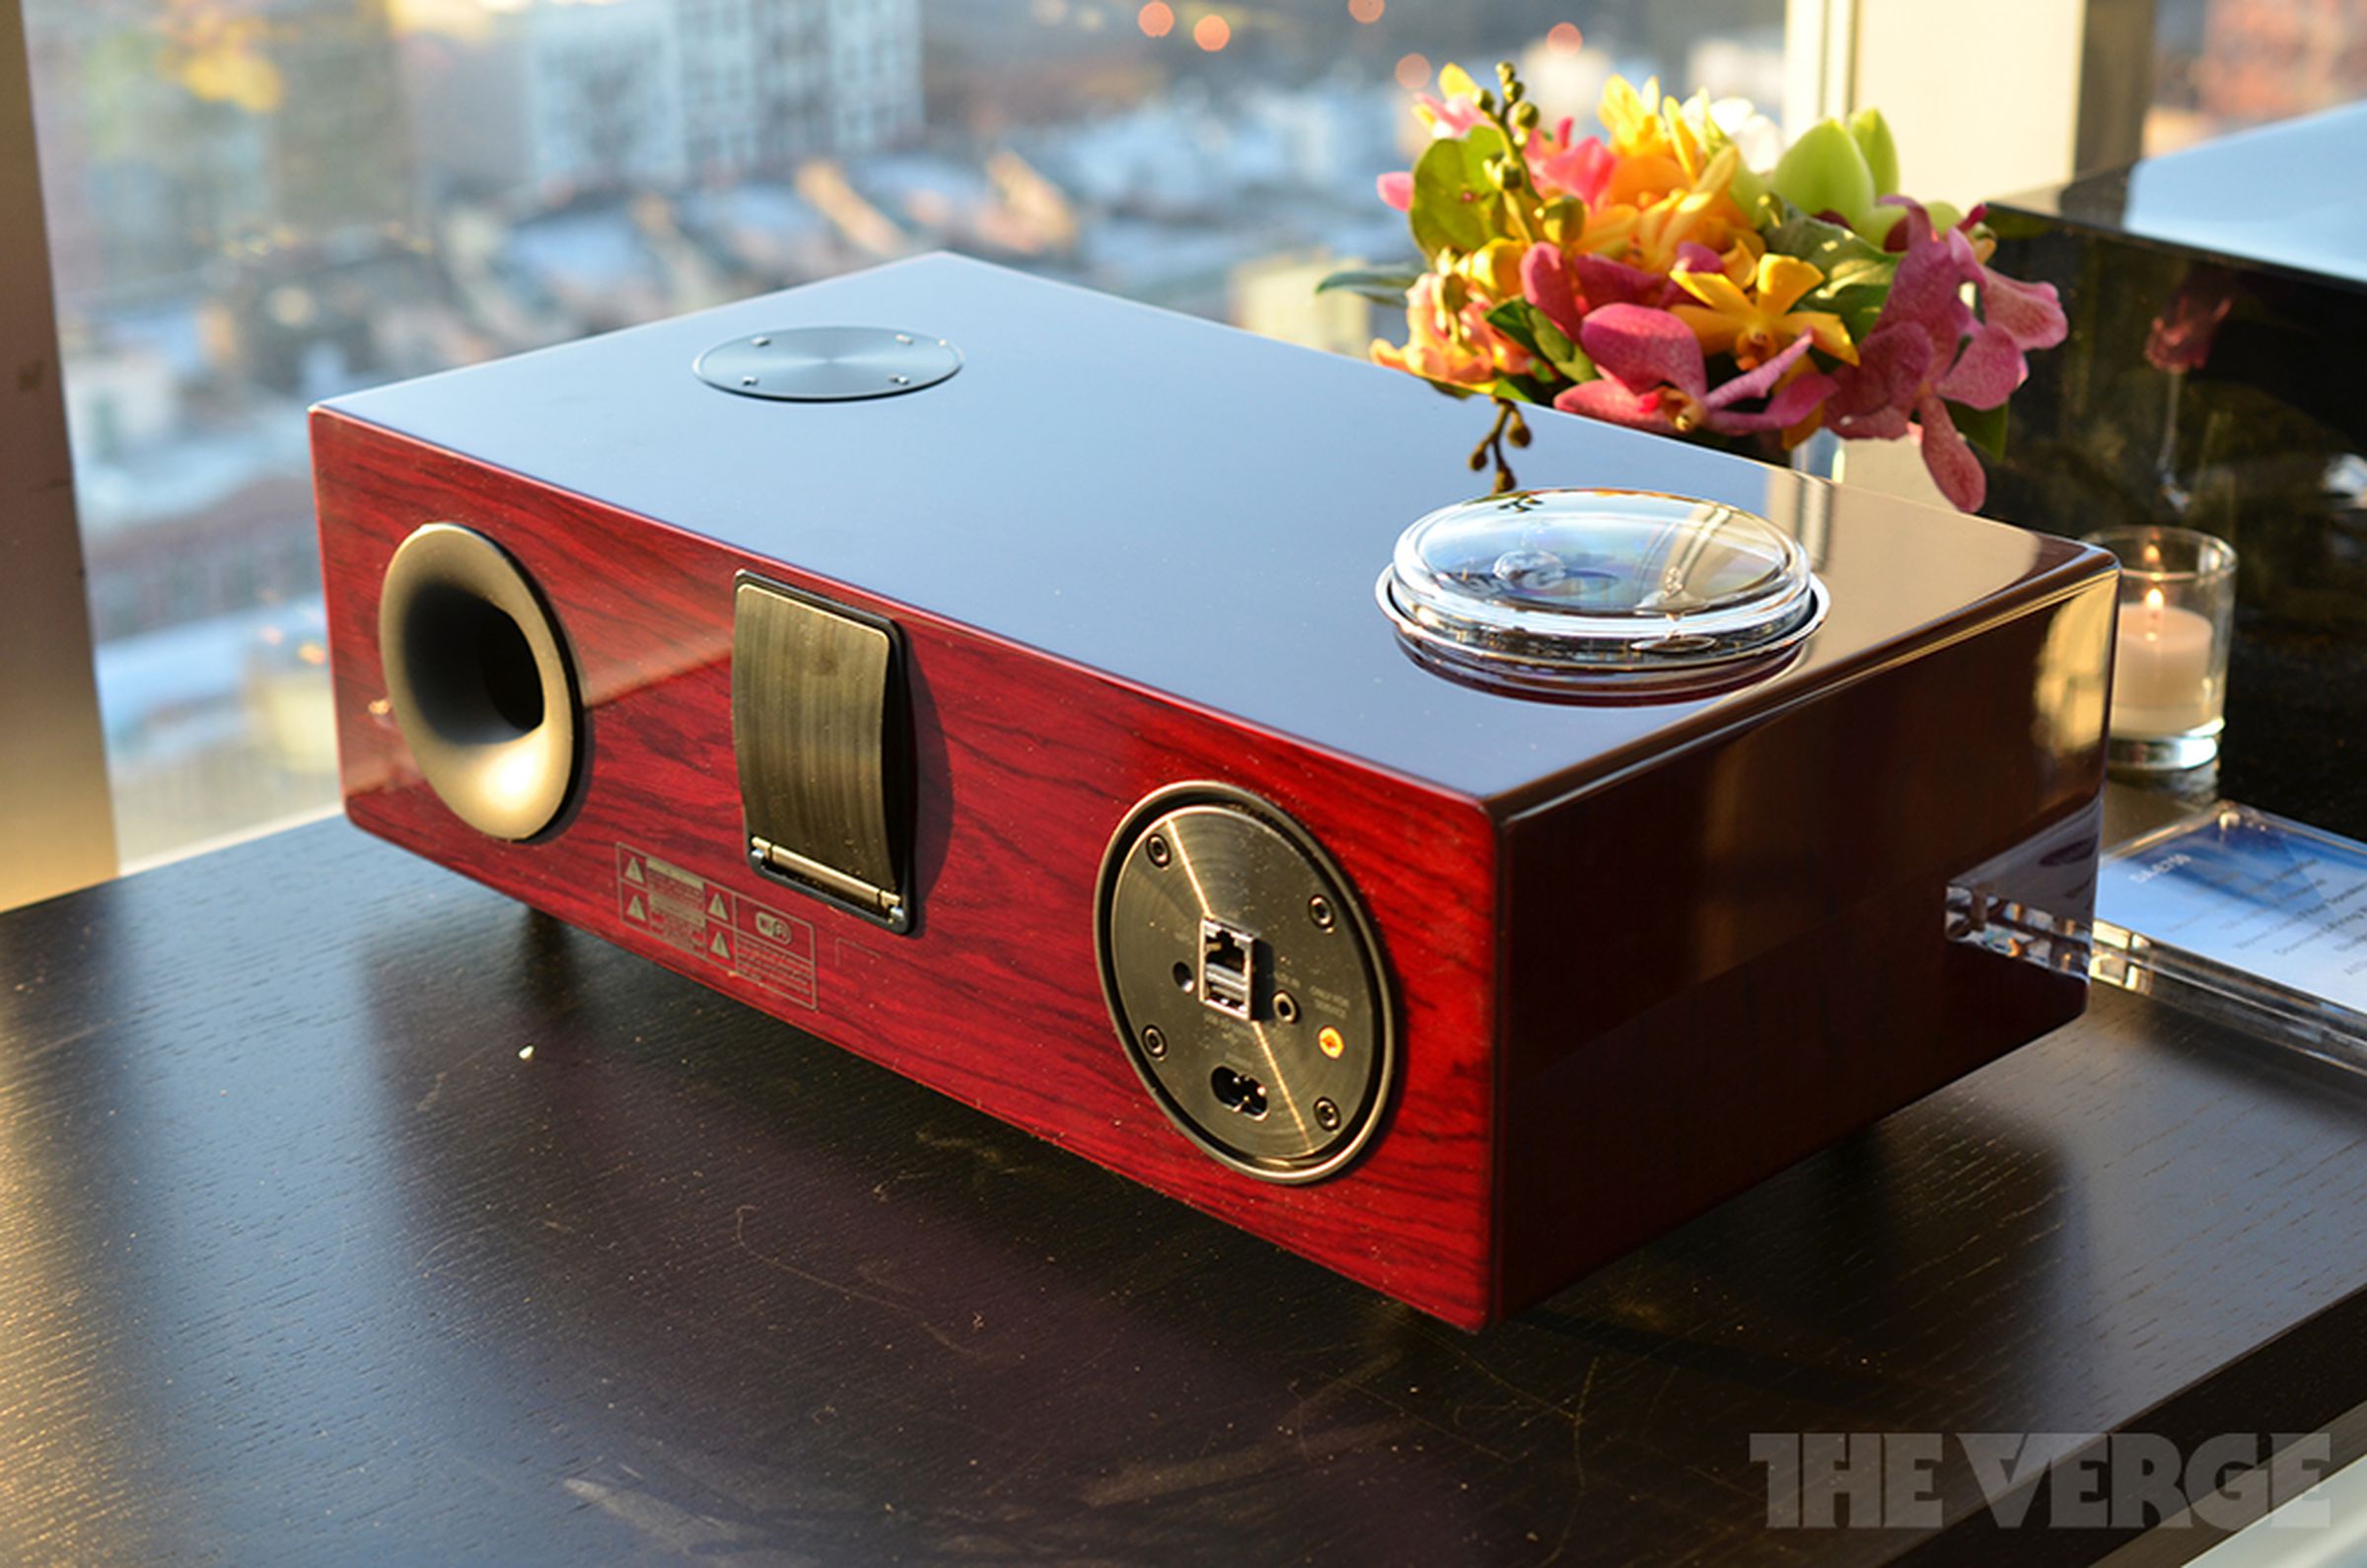 Samsung audio docks and HTIB systems hands-on photos